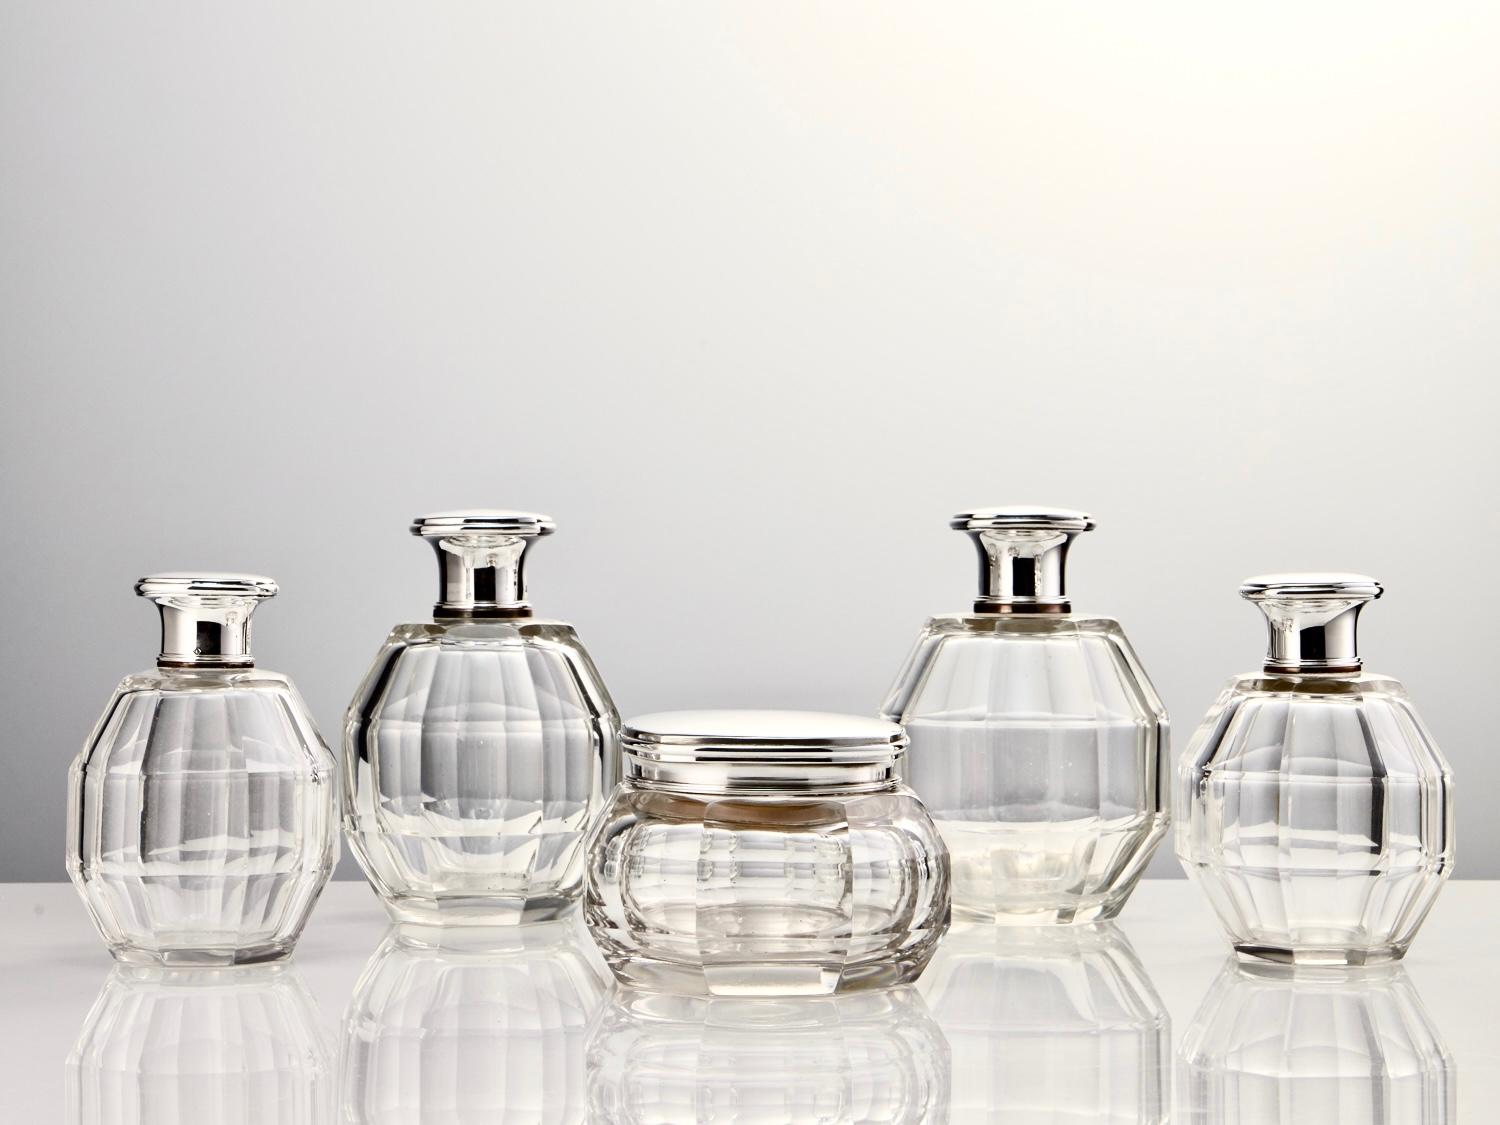 Presenting an superb 20th-century set of Art Deco French silver dressing table perfume bottles, originating around 1920.

This set captures the iconic Art Deco style with a stunning blend of faceted glass and fine quality silver. Crafted with